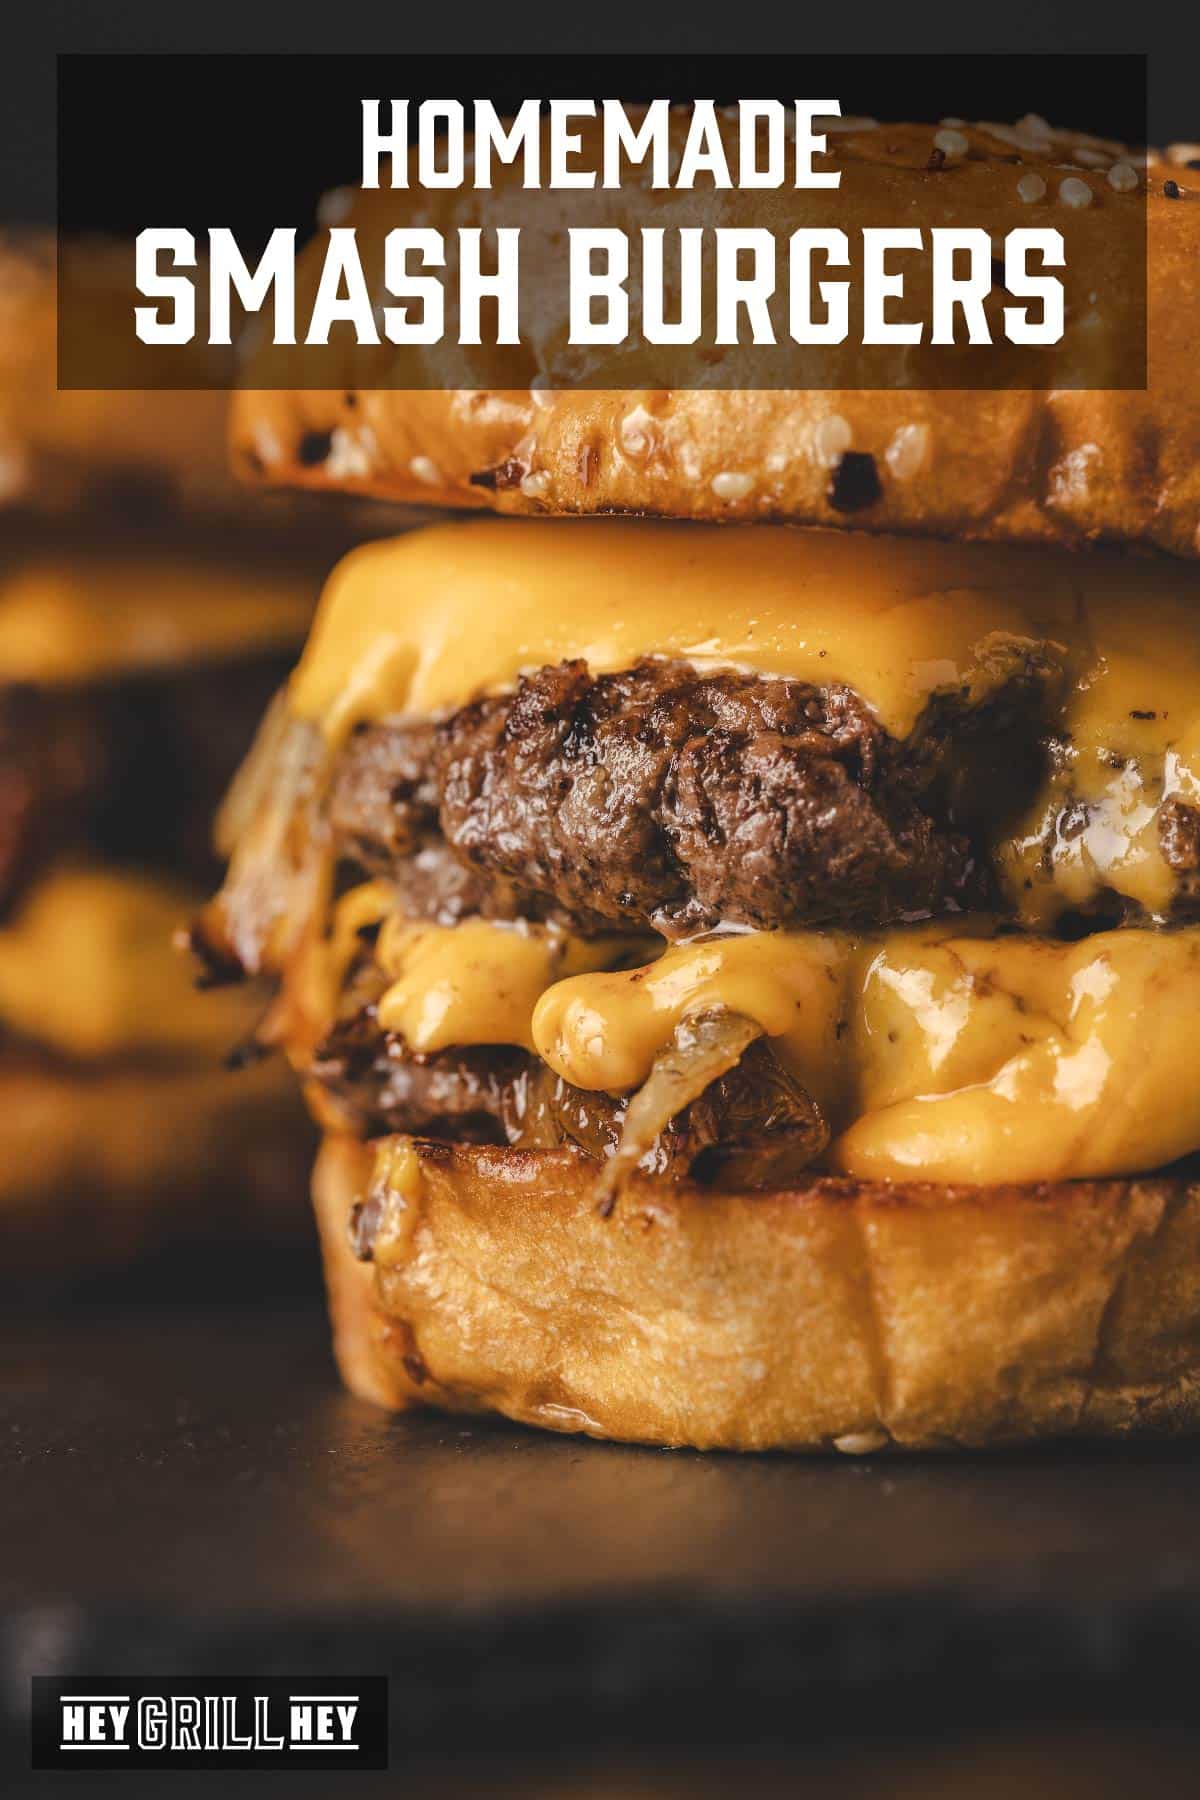 Grilled cheeseburgers with sesame buns on black surface. Text reads "Homemade Smash Burgers".